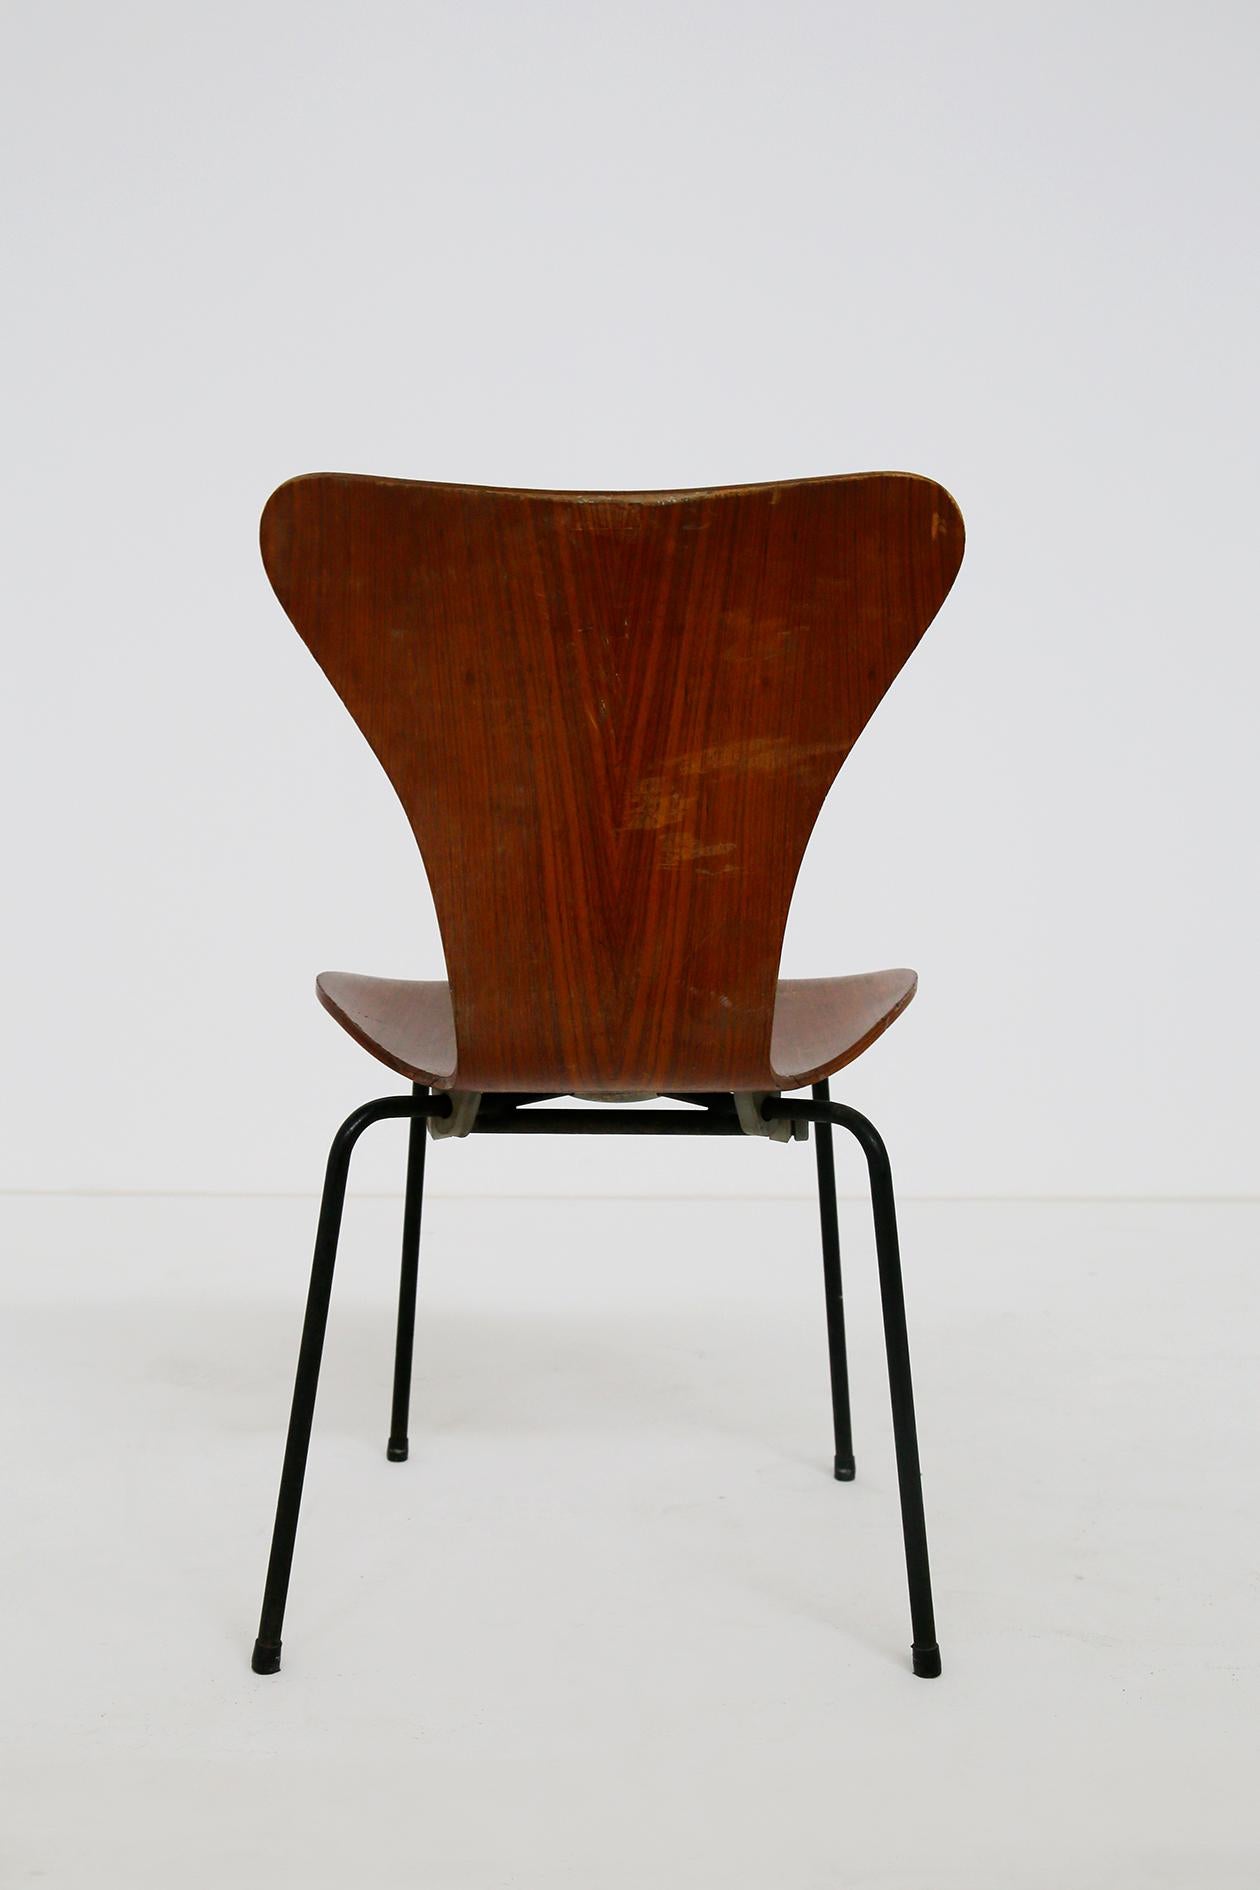 Mid-Century Modern Set of Six Chairs by Arne Jacobsen M. Butterfly for the Brazilian Airline, 1950s For Sale